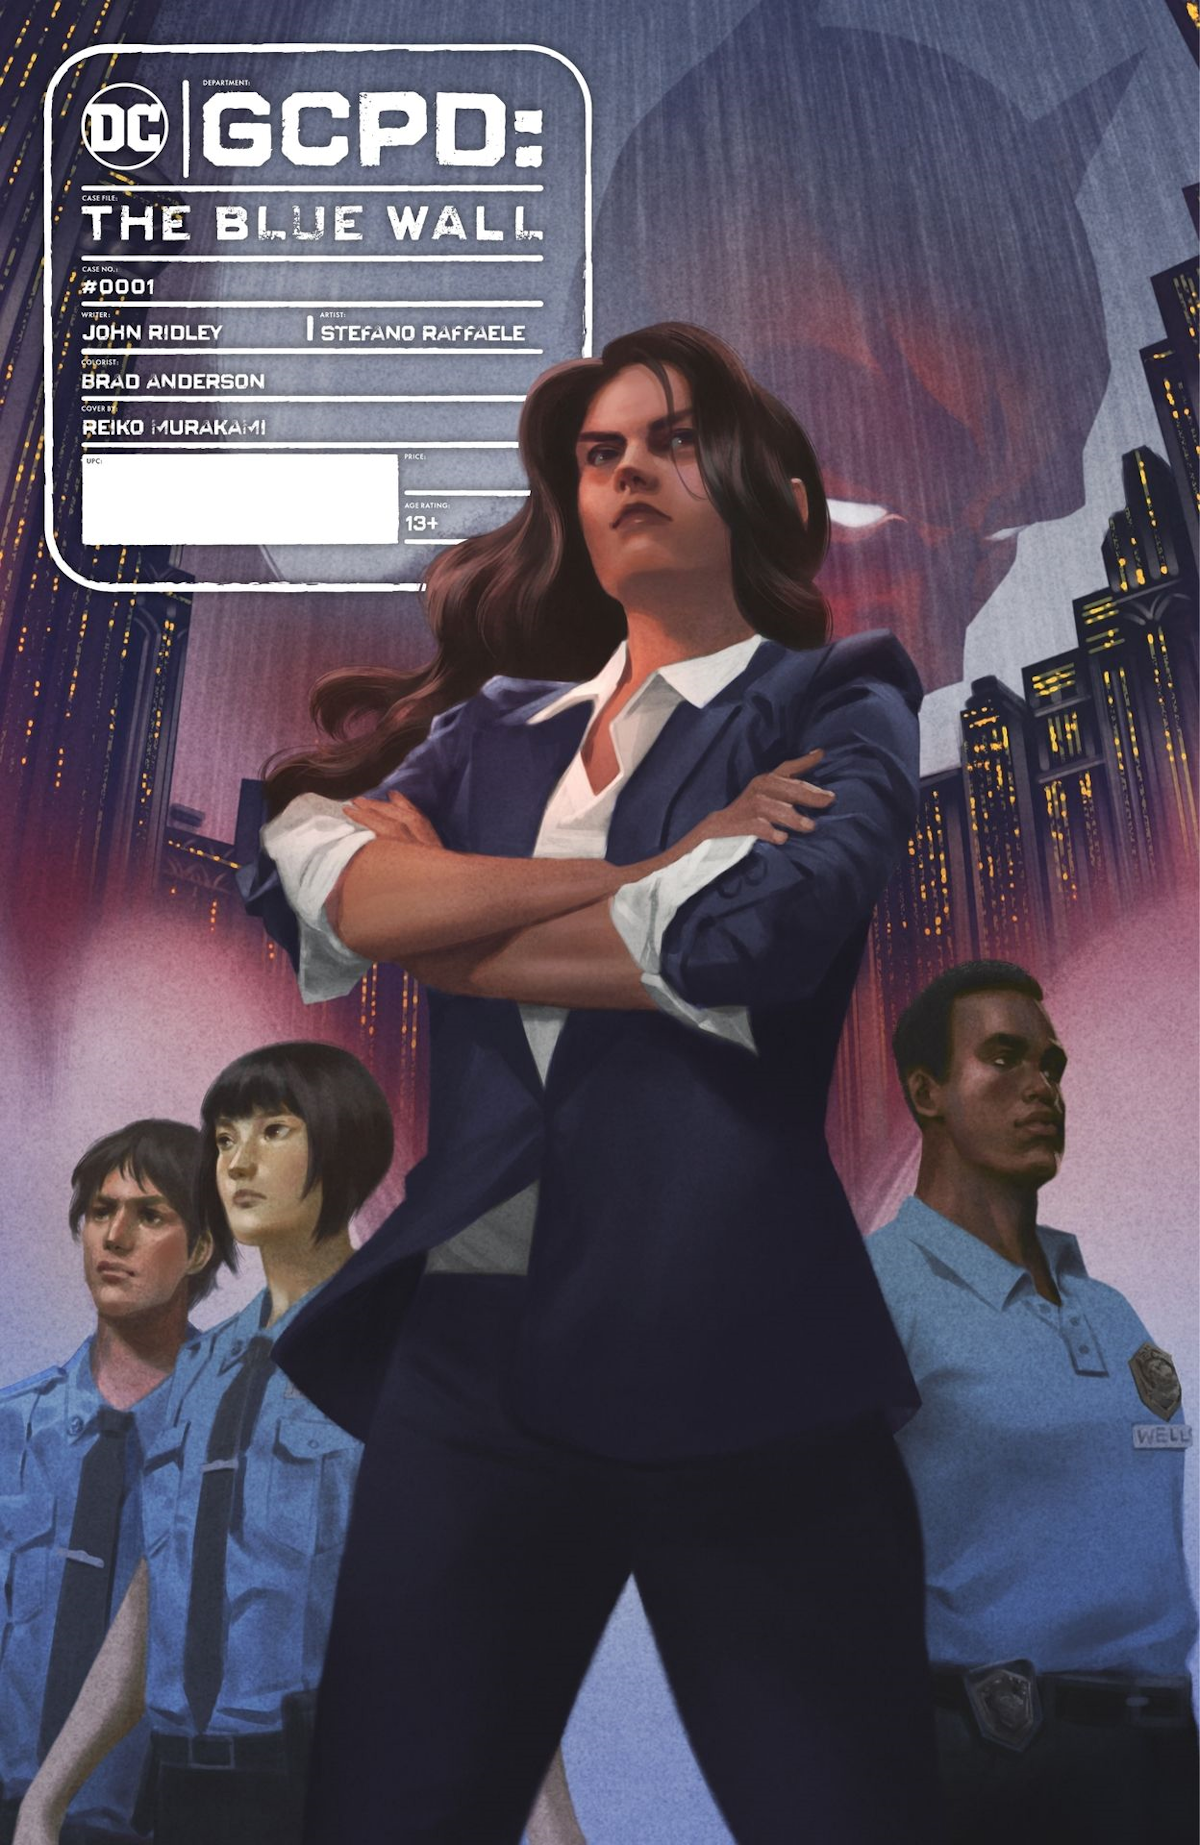 GCPD: The Blue Wall Title Index